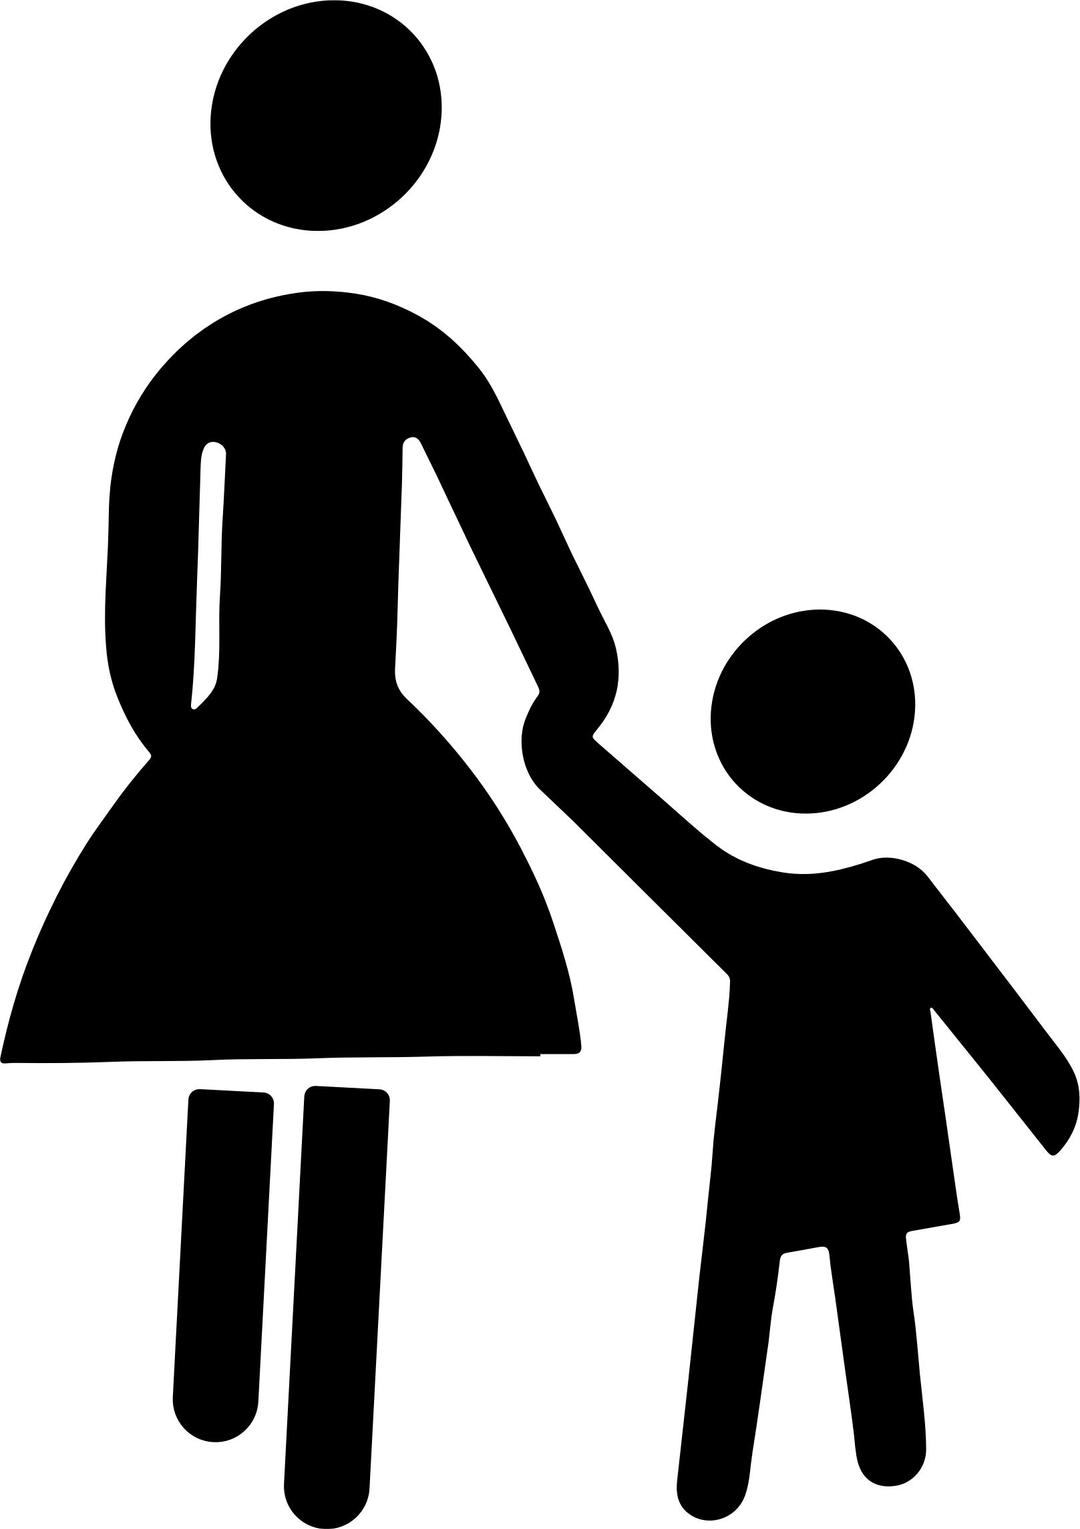 Mother And Child Holding Hands Silhouette png transparent